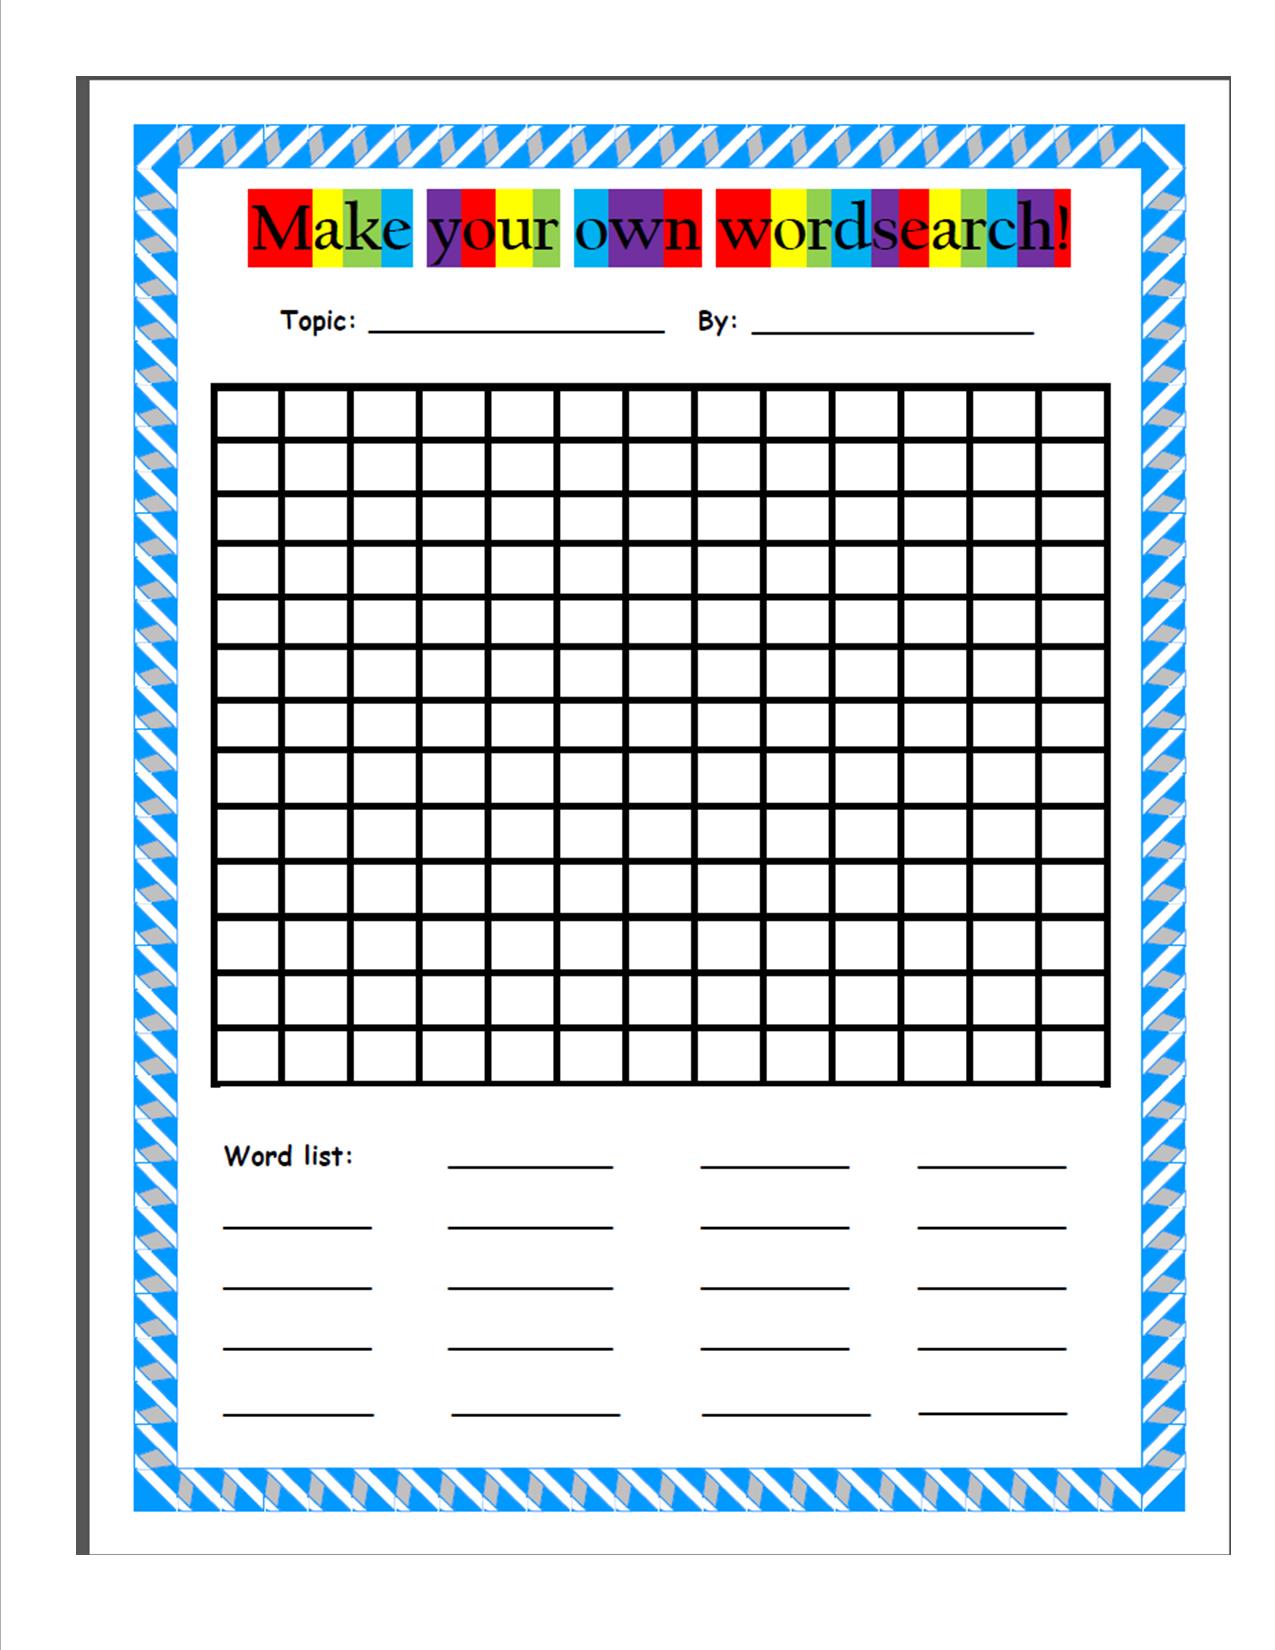 Make your own wordsearch - kid friendly